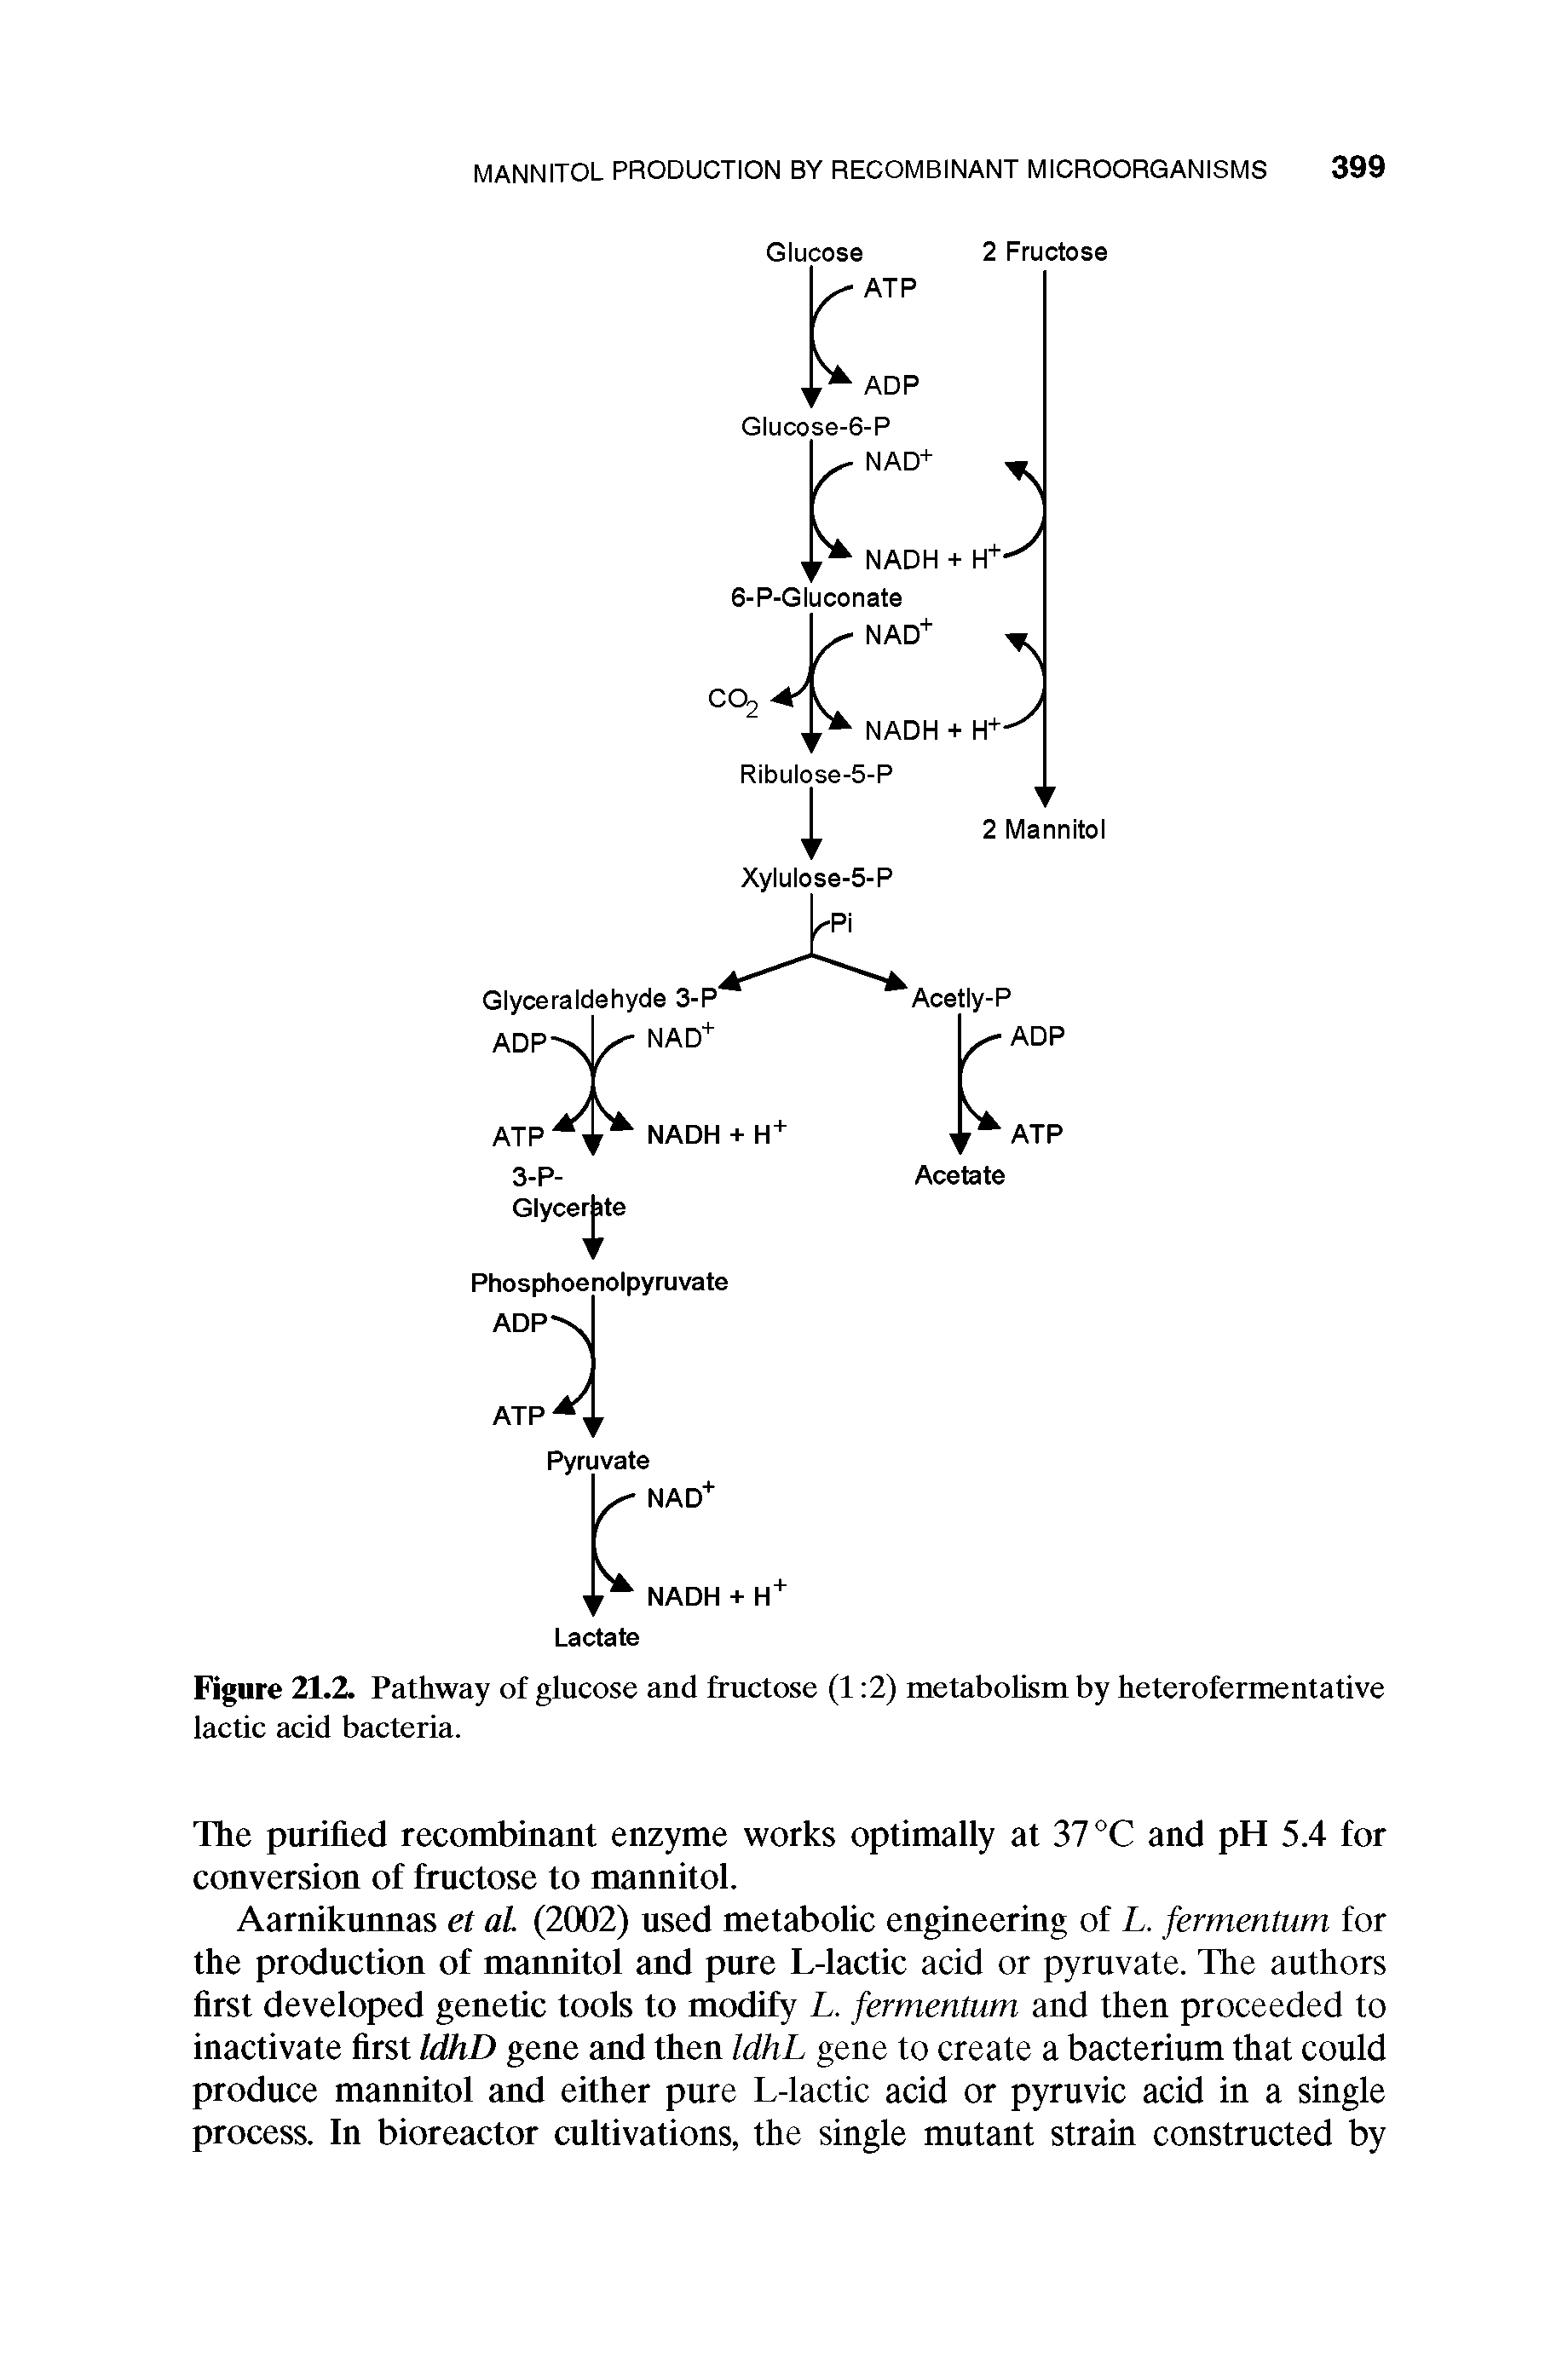 Figure 21.2. Pathway of glucose and fructose (1 2) metabolism by heterofermentative lactic acid bacteria.